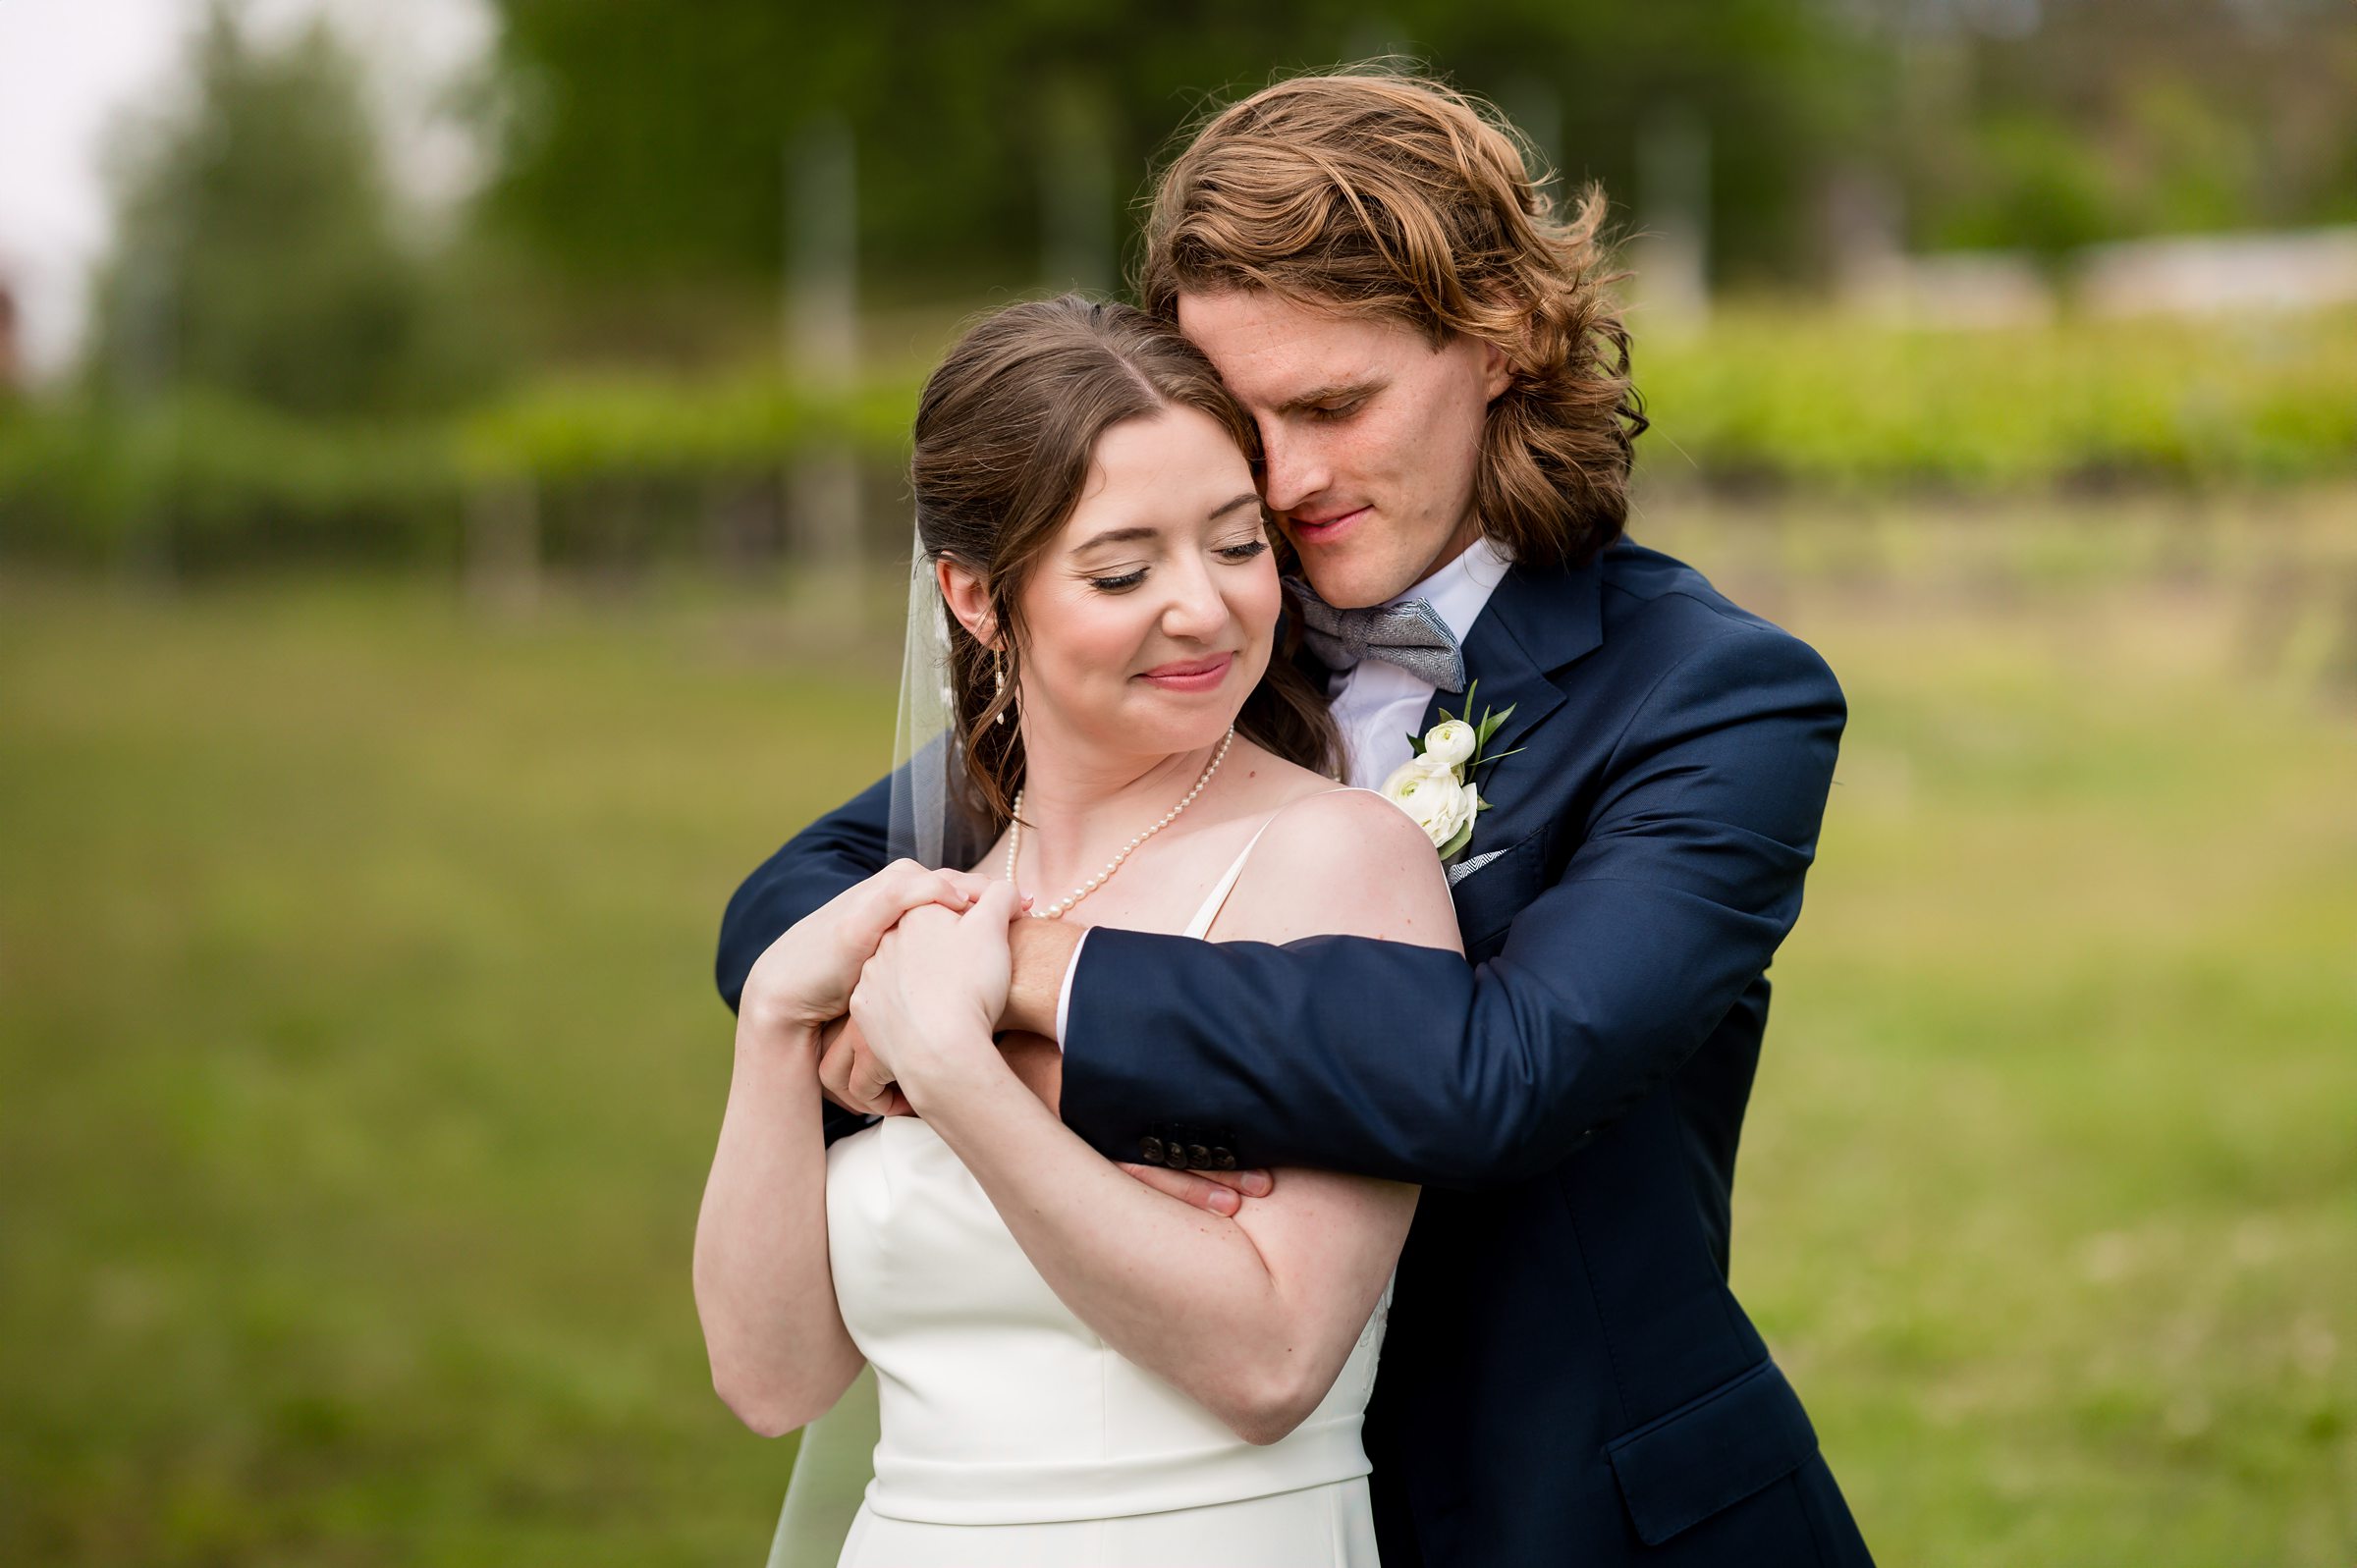 A bride and groom stand outdoors, with the groom hugging the bride from behind. The bride wears a white dress and the groom wears a dark suit. They both have their eyes closed, smiling softly.